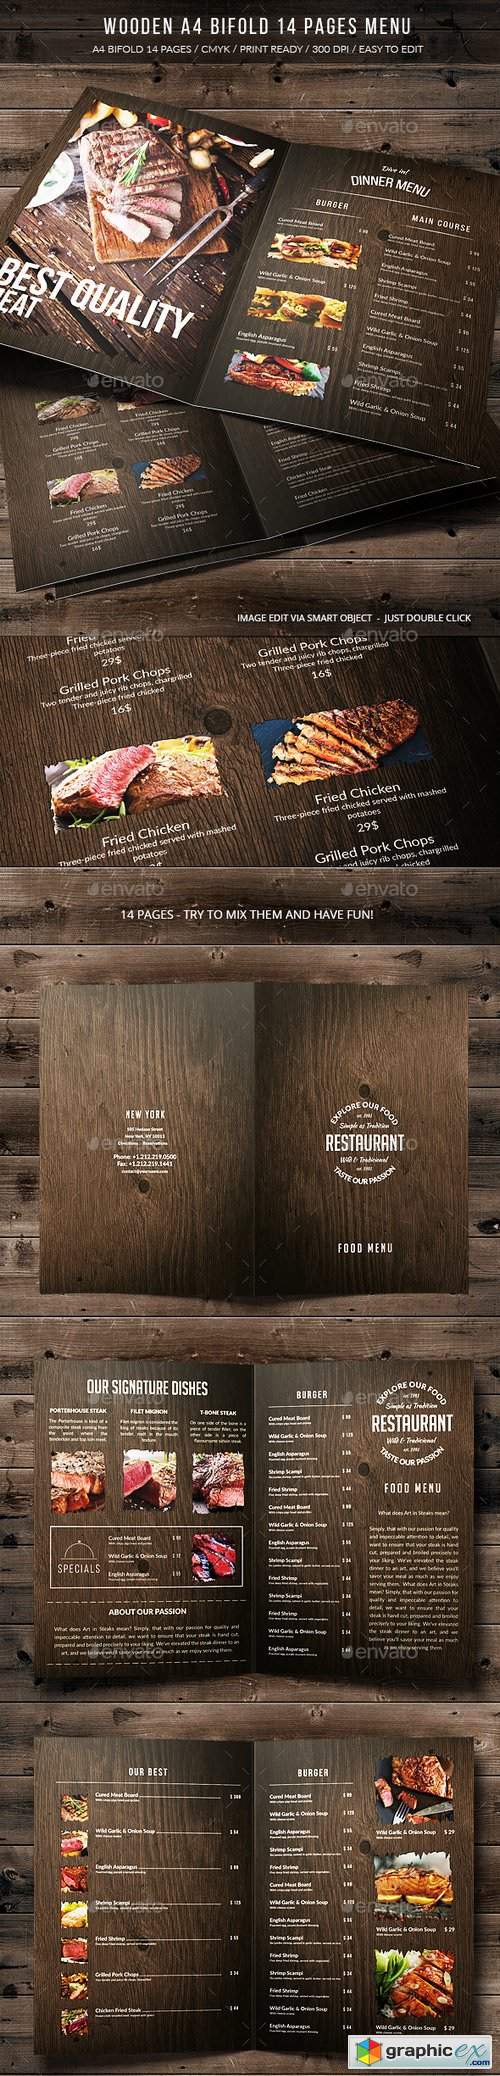 Wooden A4 Bifold 14 Pages Menu